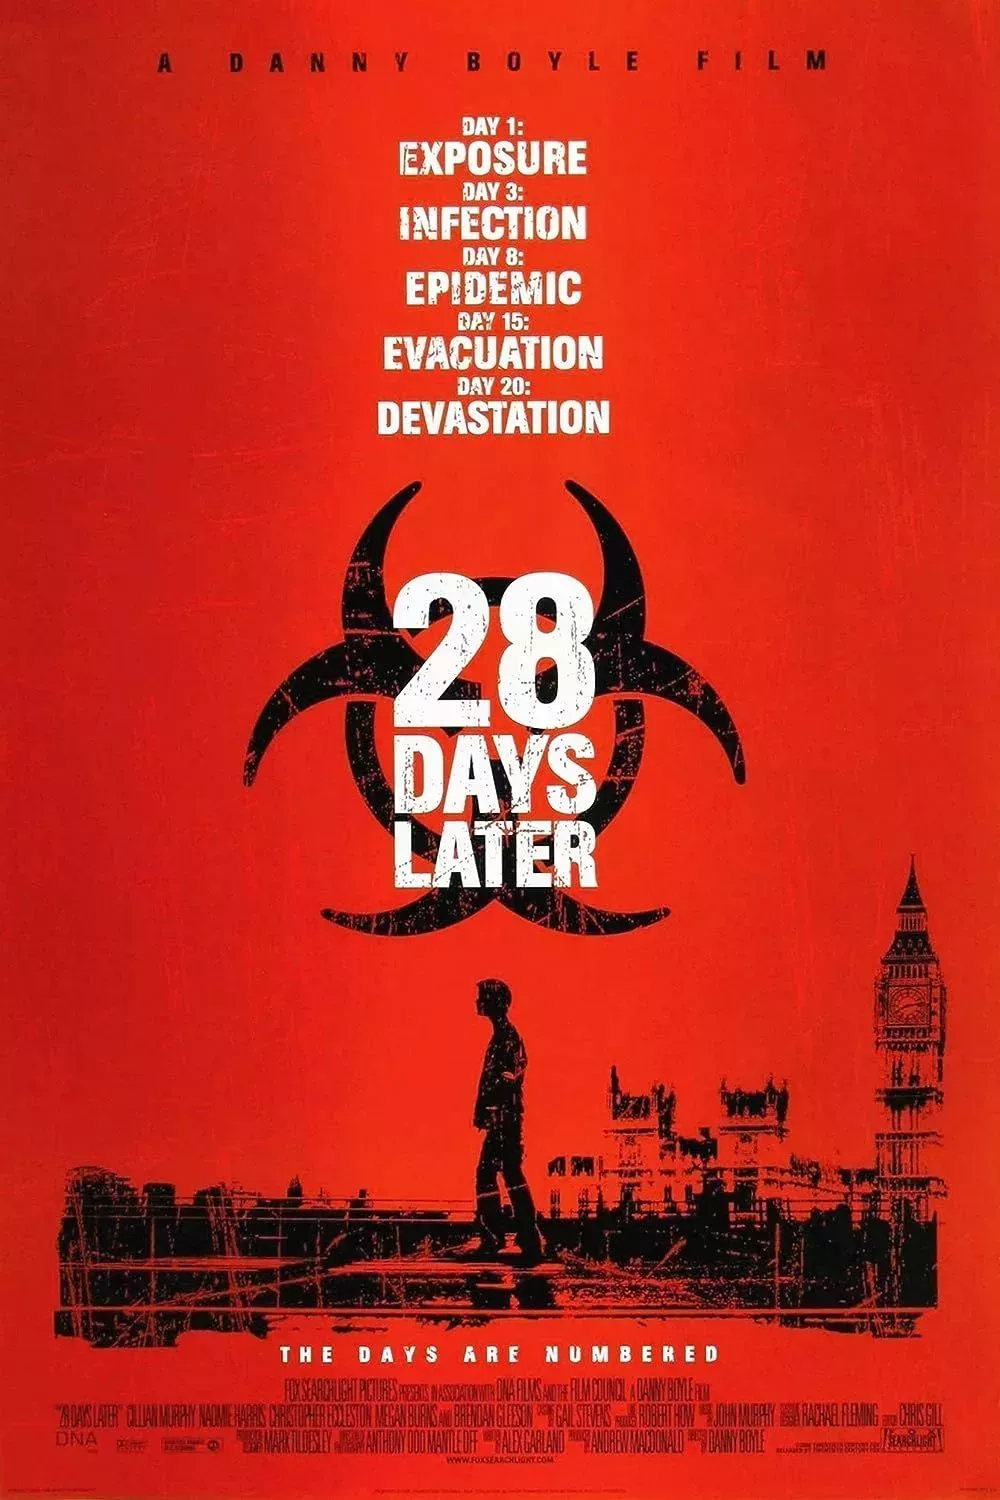 A man's silhouette roaming around a city on the poster of 28 Days Later